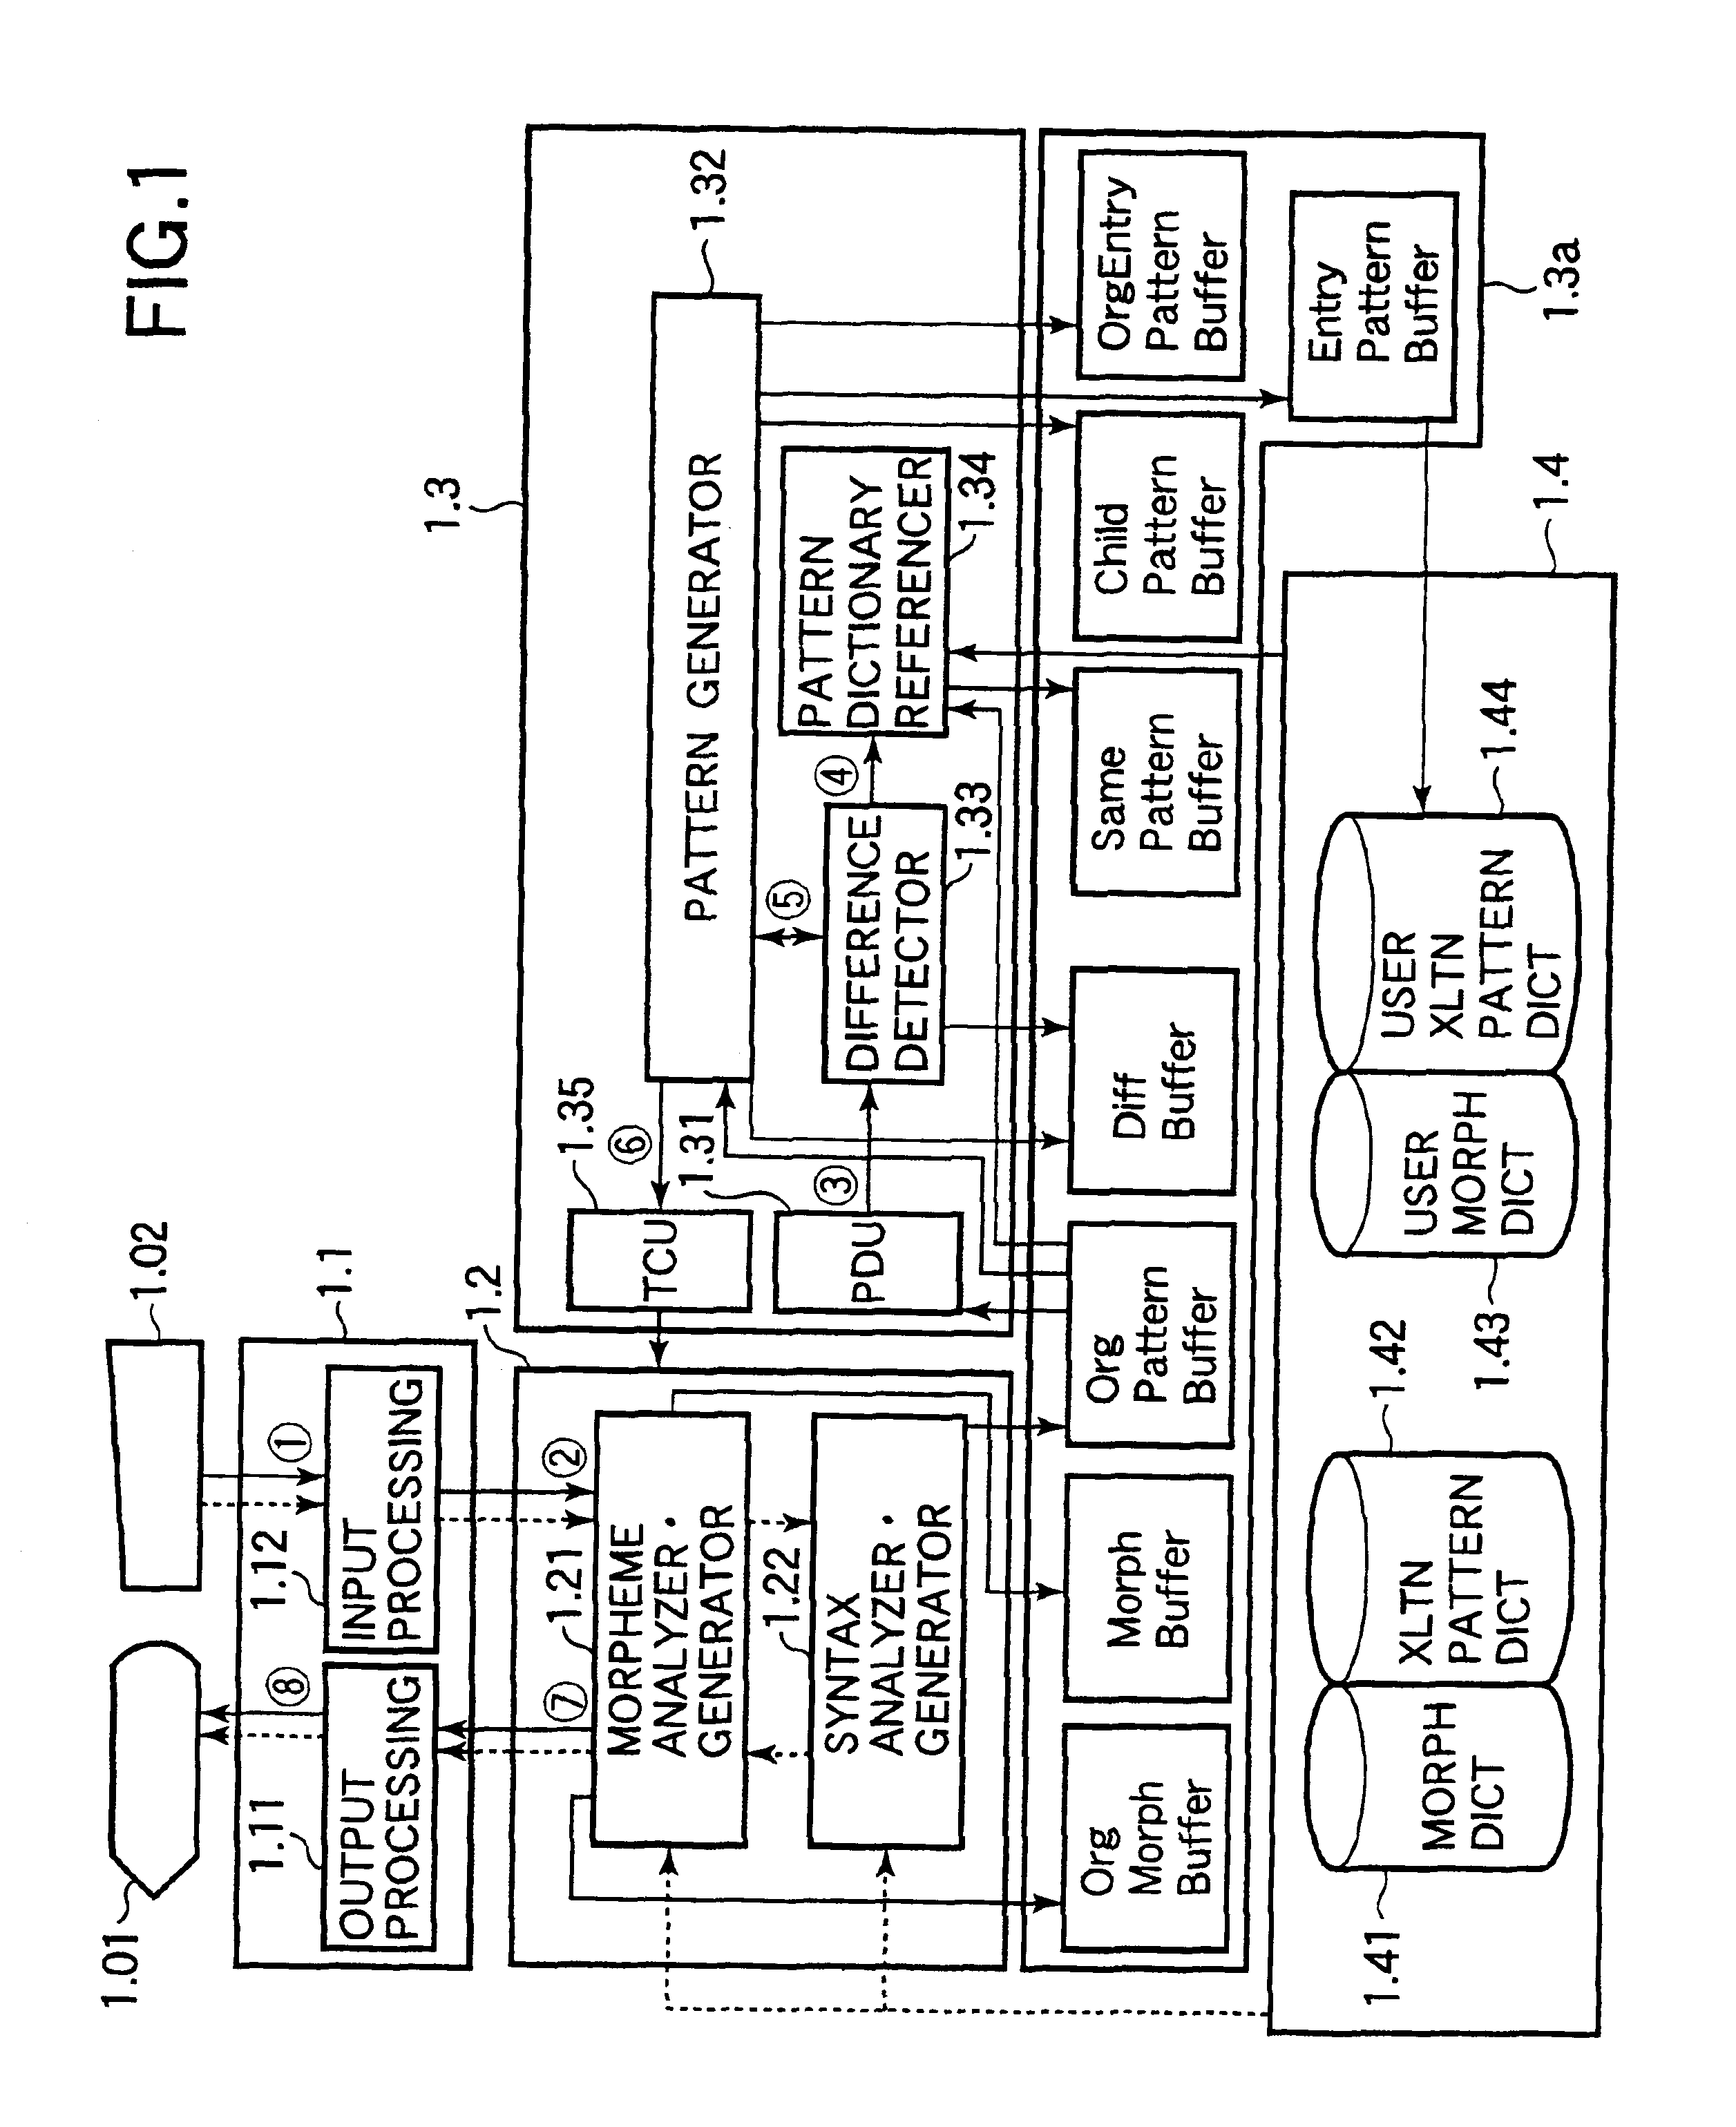 Apparatus and method for adding information to a machine translation dictionary